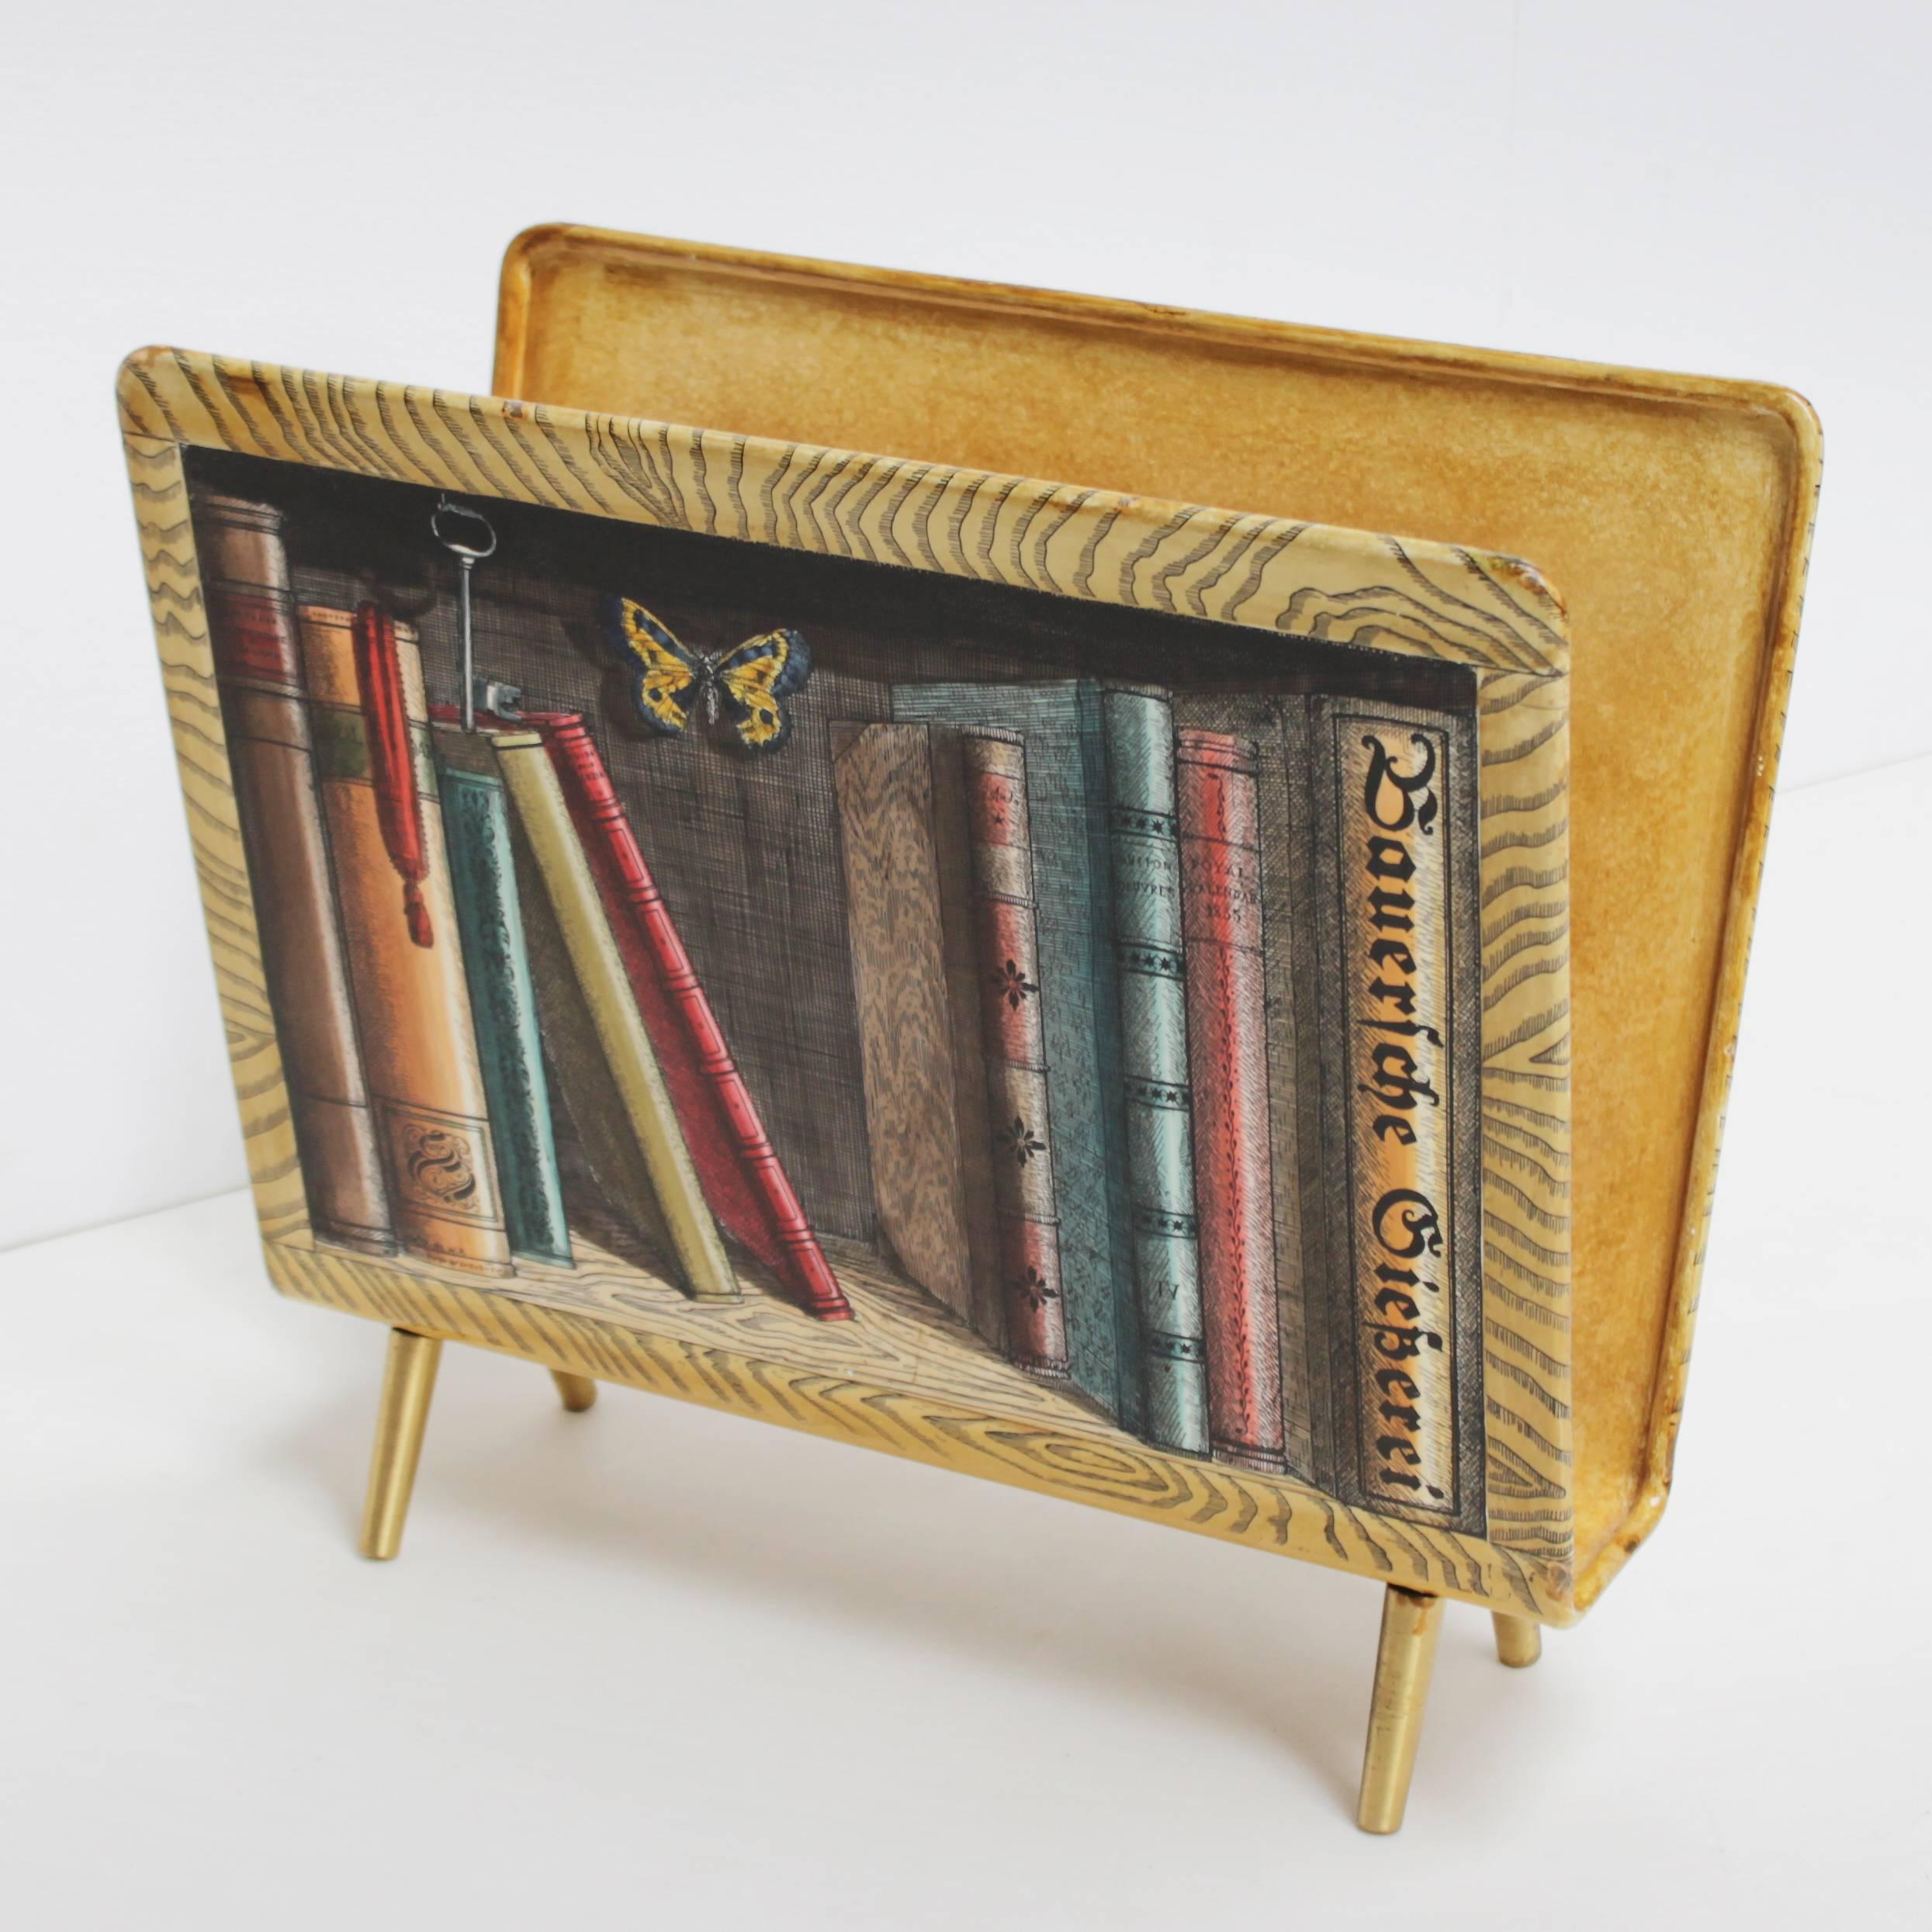 A magazine rack from the fifties by Piero Fornasetti decorated with a trompe l'oeil bookcase. This piece is lithographically printed and hand-painted in beautiful colors. 
Brass divider and feet. It's really in a top condition: no crack, no